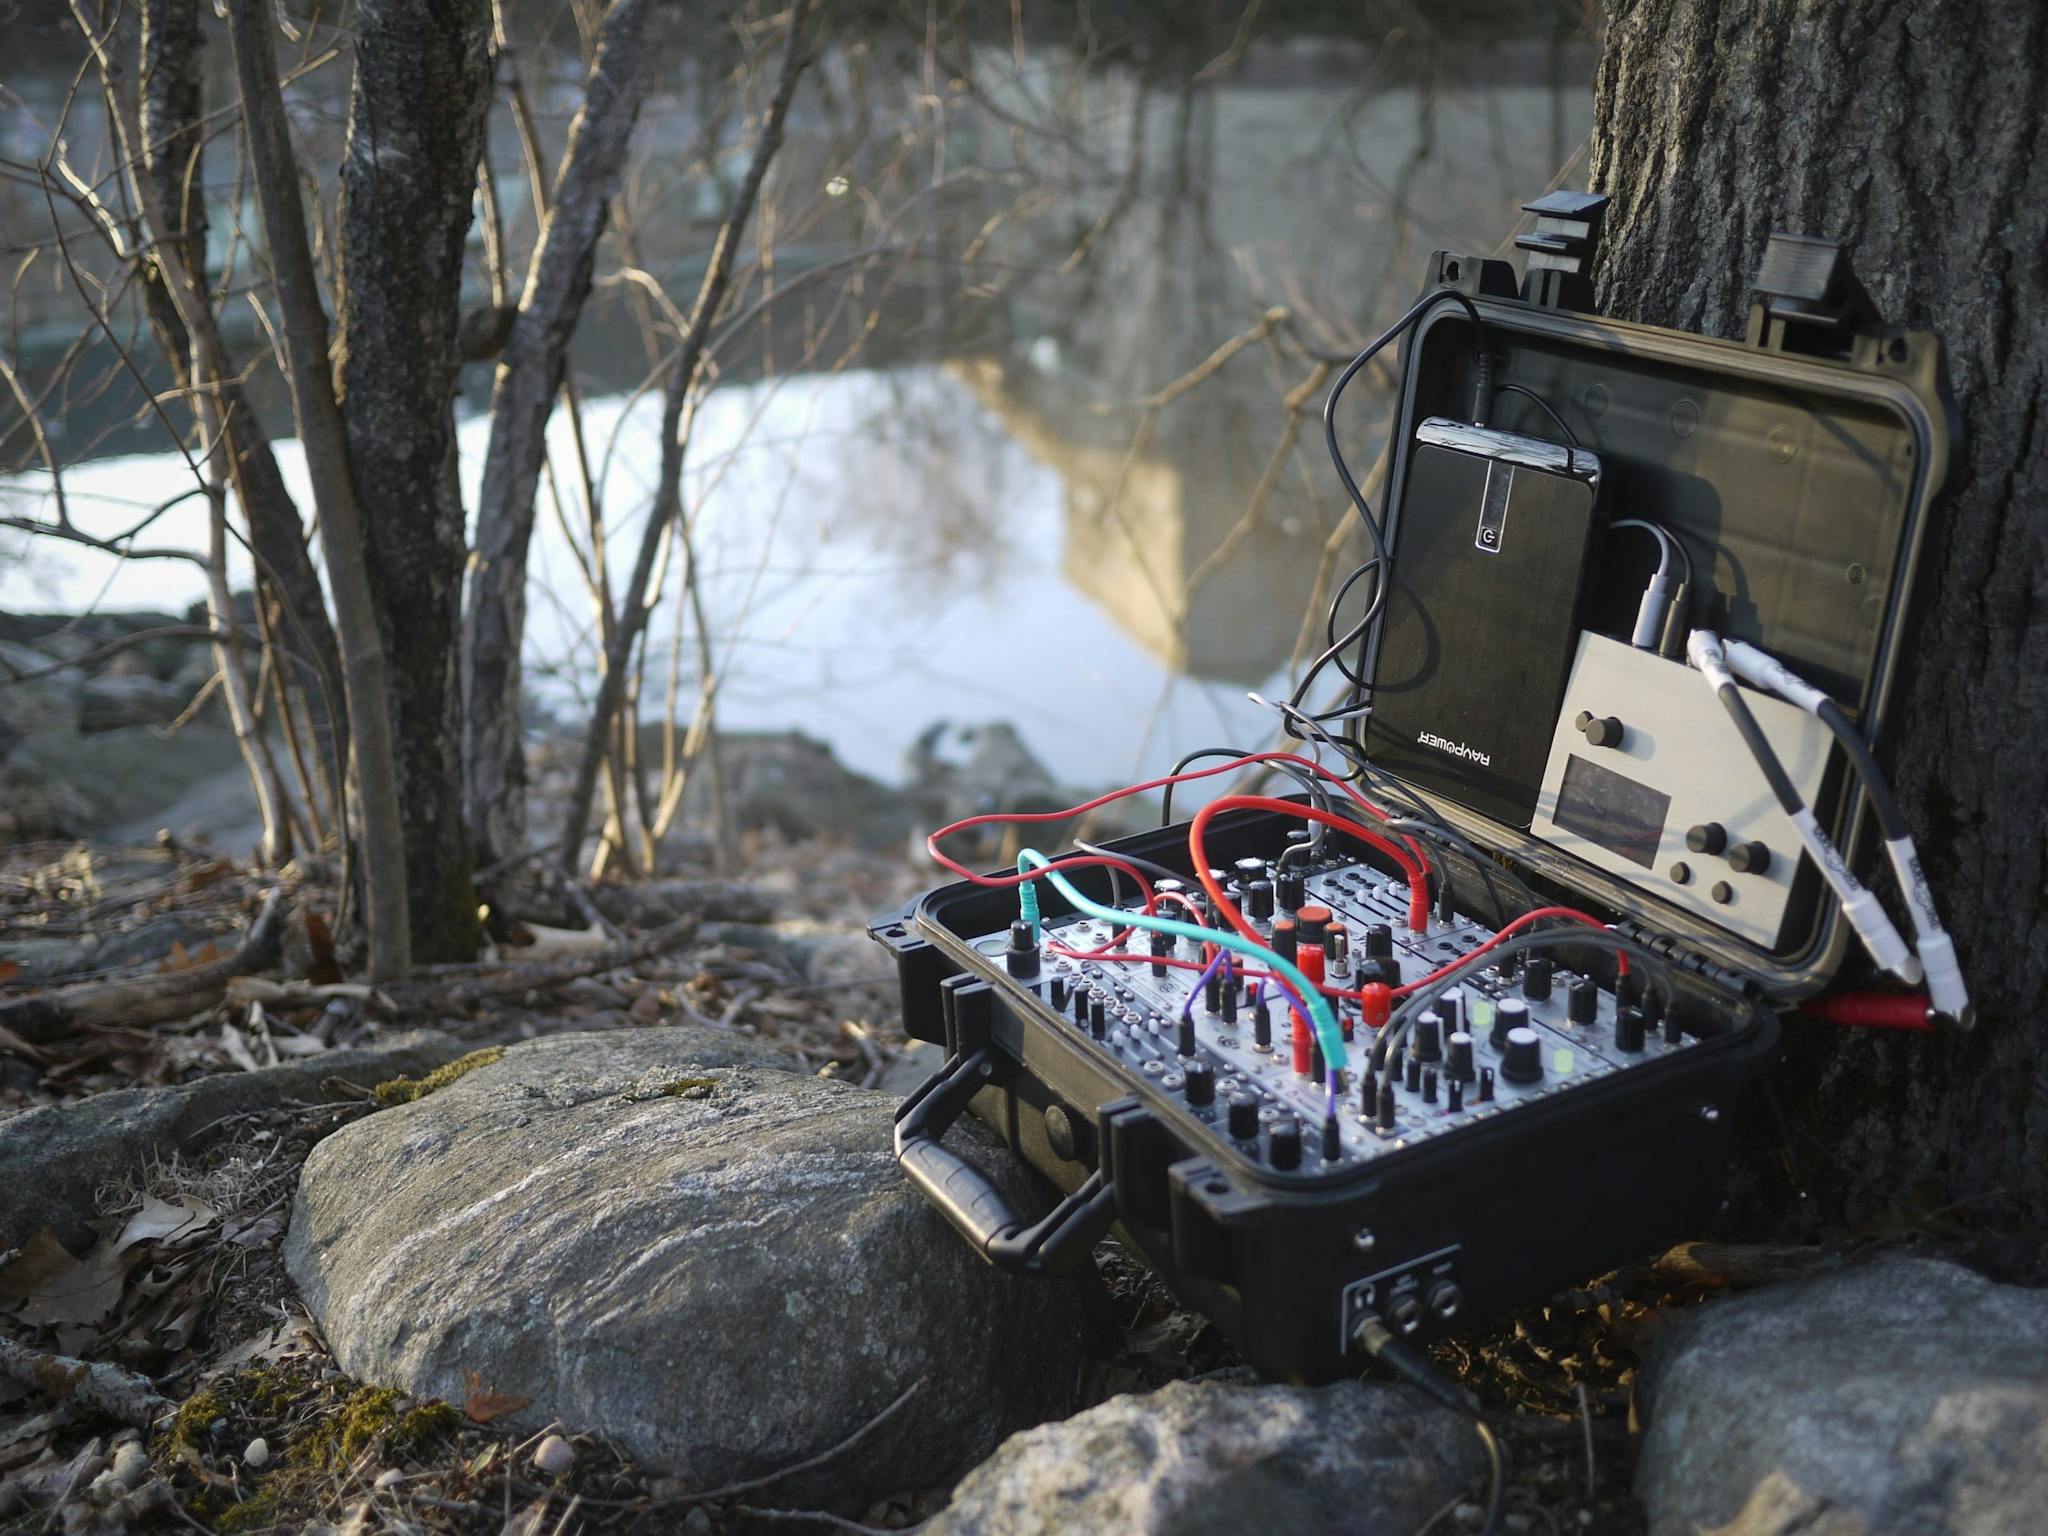 A sound system rests on rocks outside near the Mystic River.